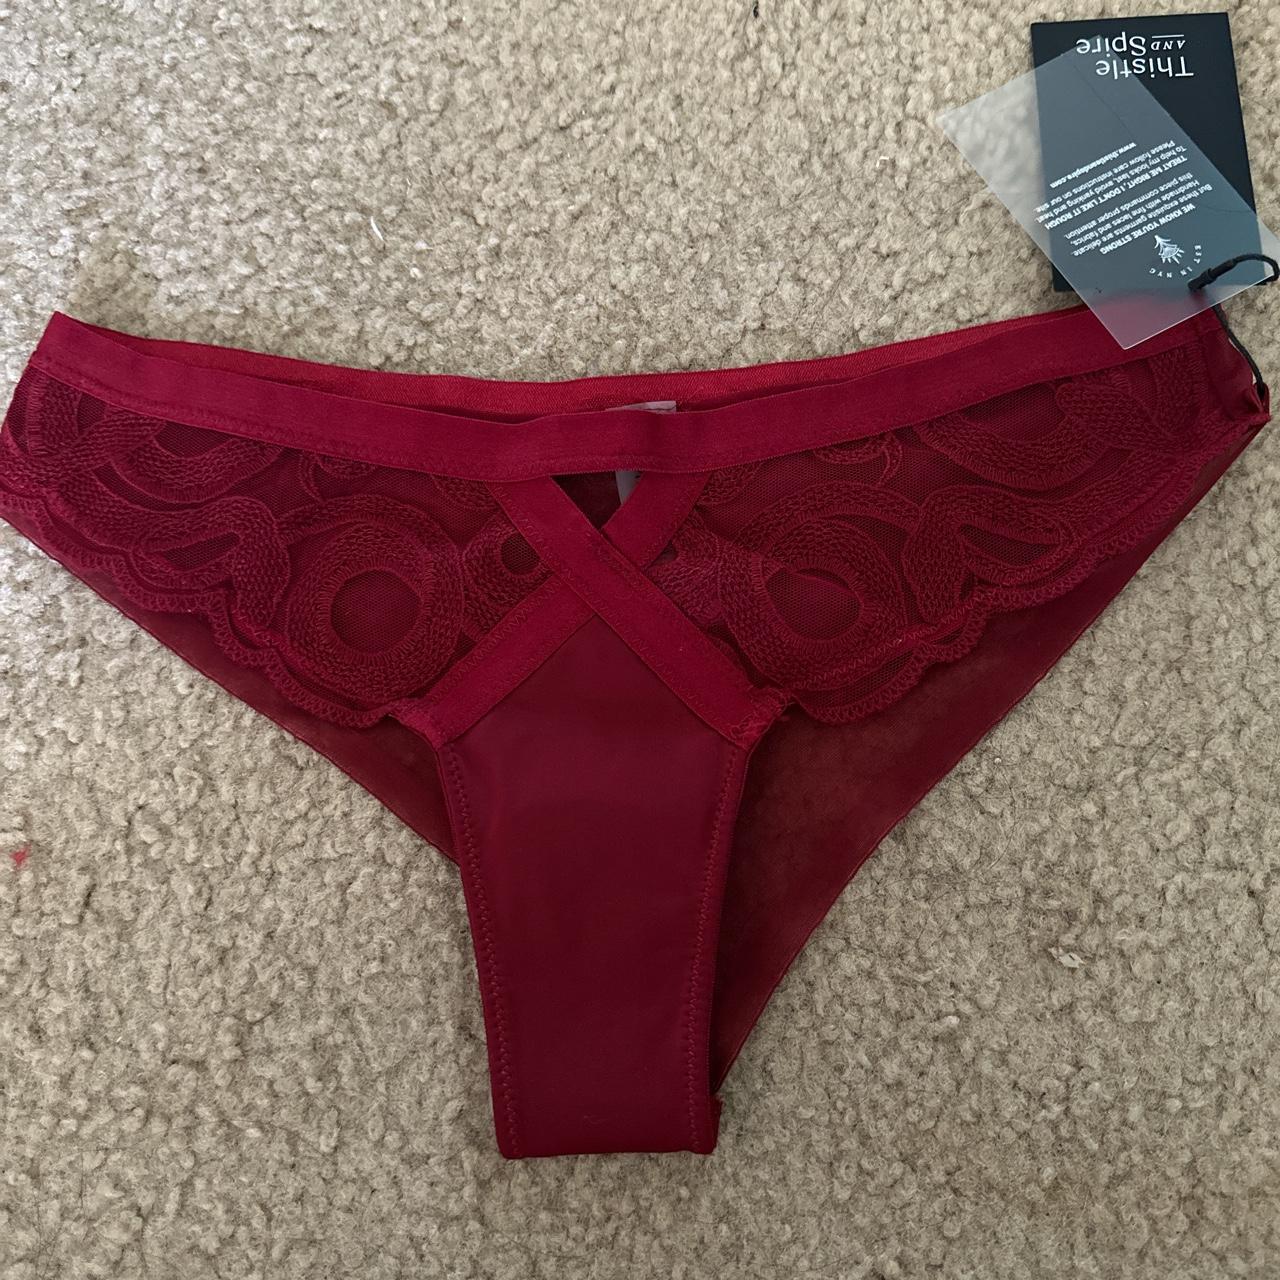 New thistle and spire scylla underwear Color - ruby - Depop